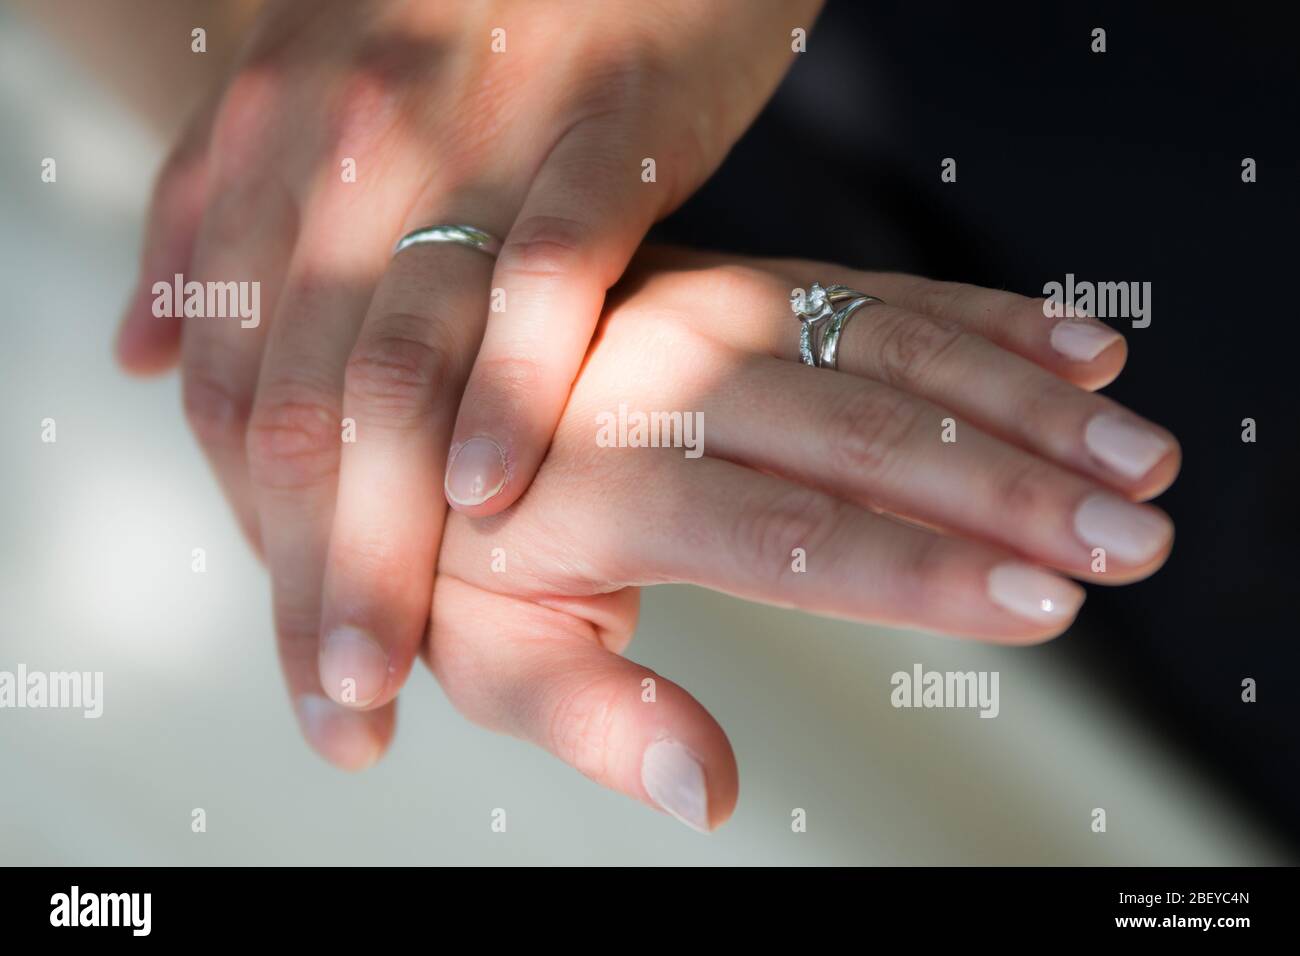 The young couple is holding their hands after the wedding ceremony and showing their new rings symbolising their love. Stock Photo